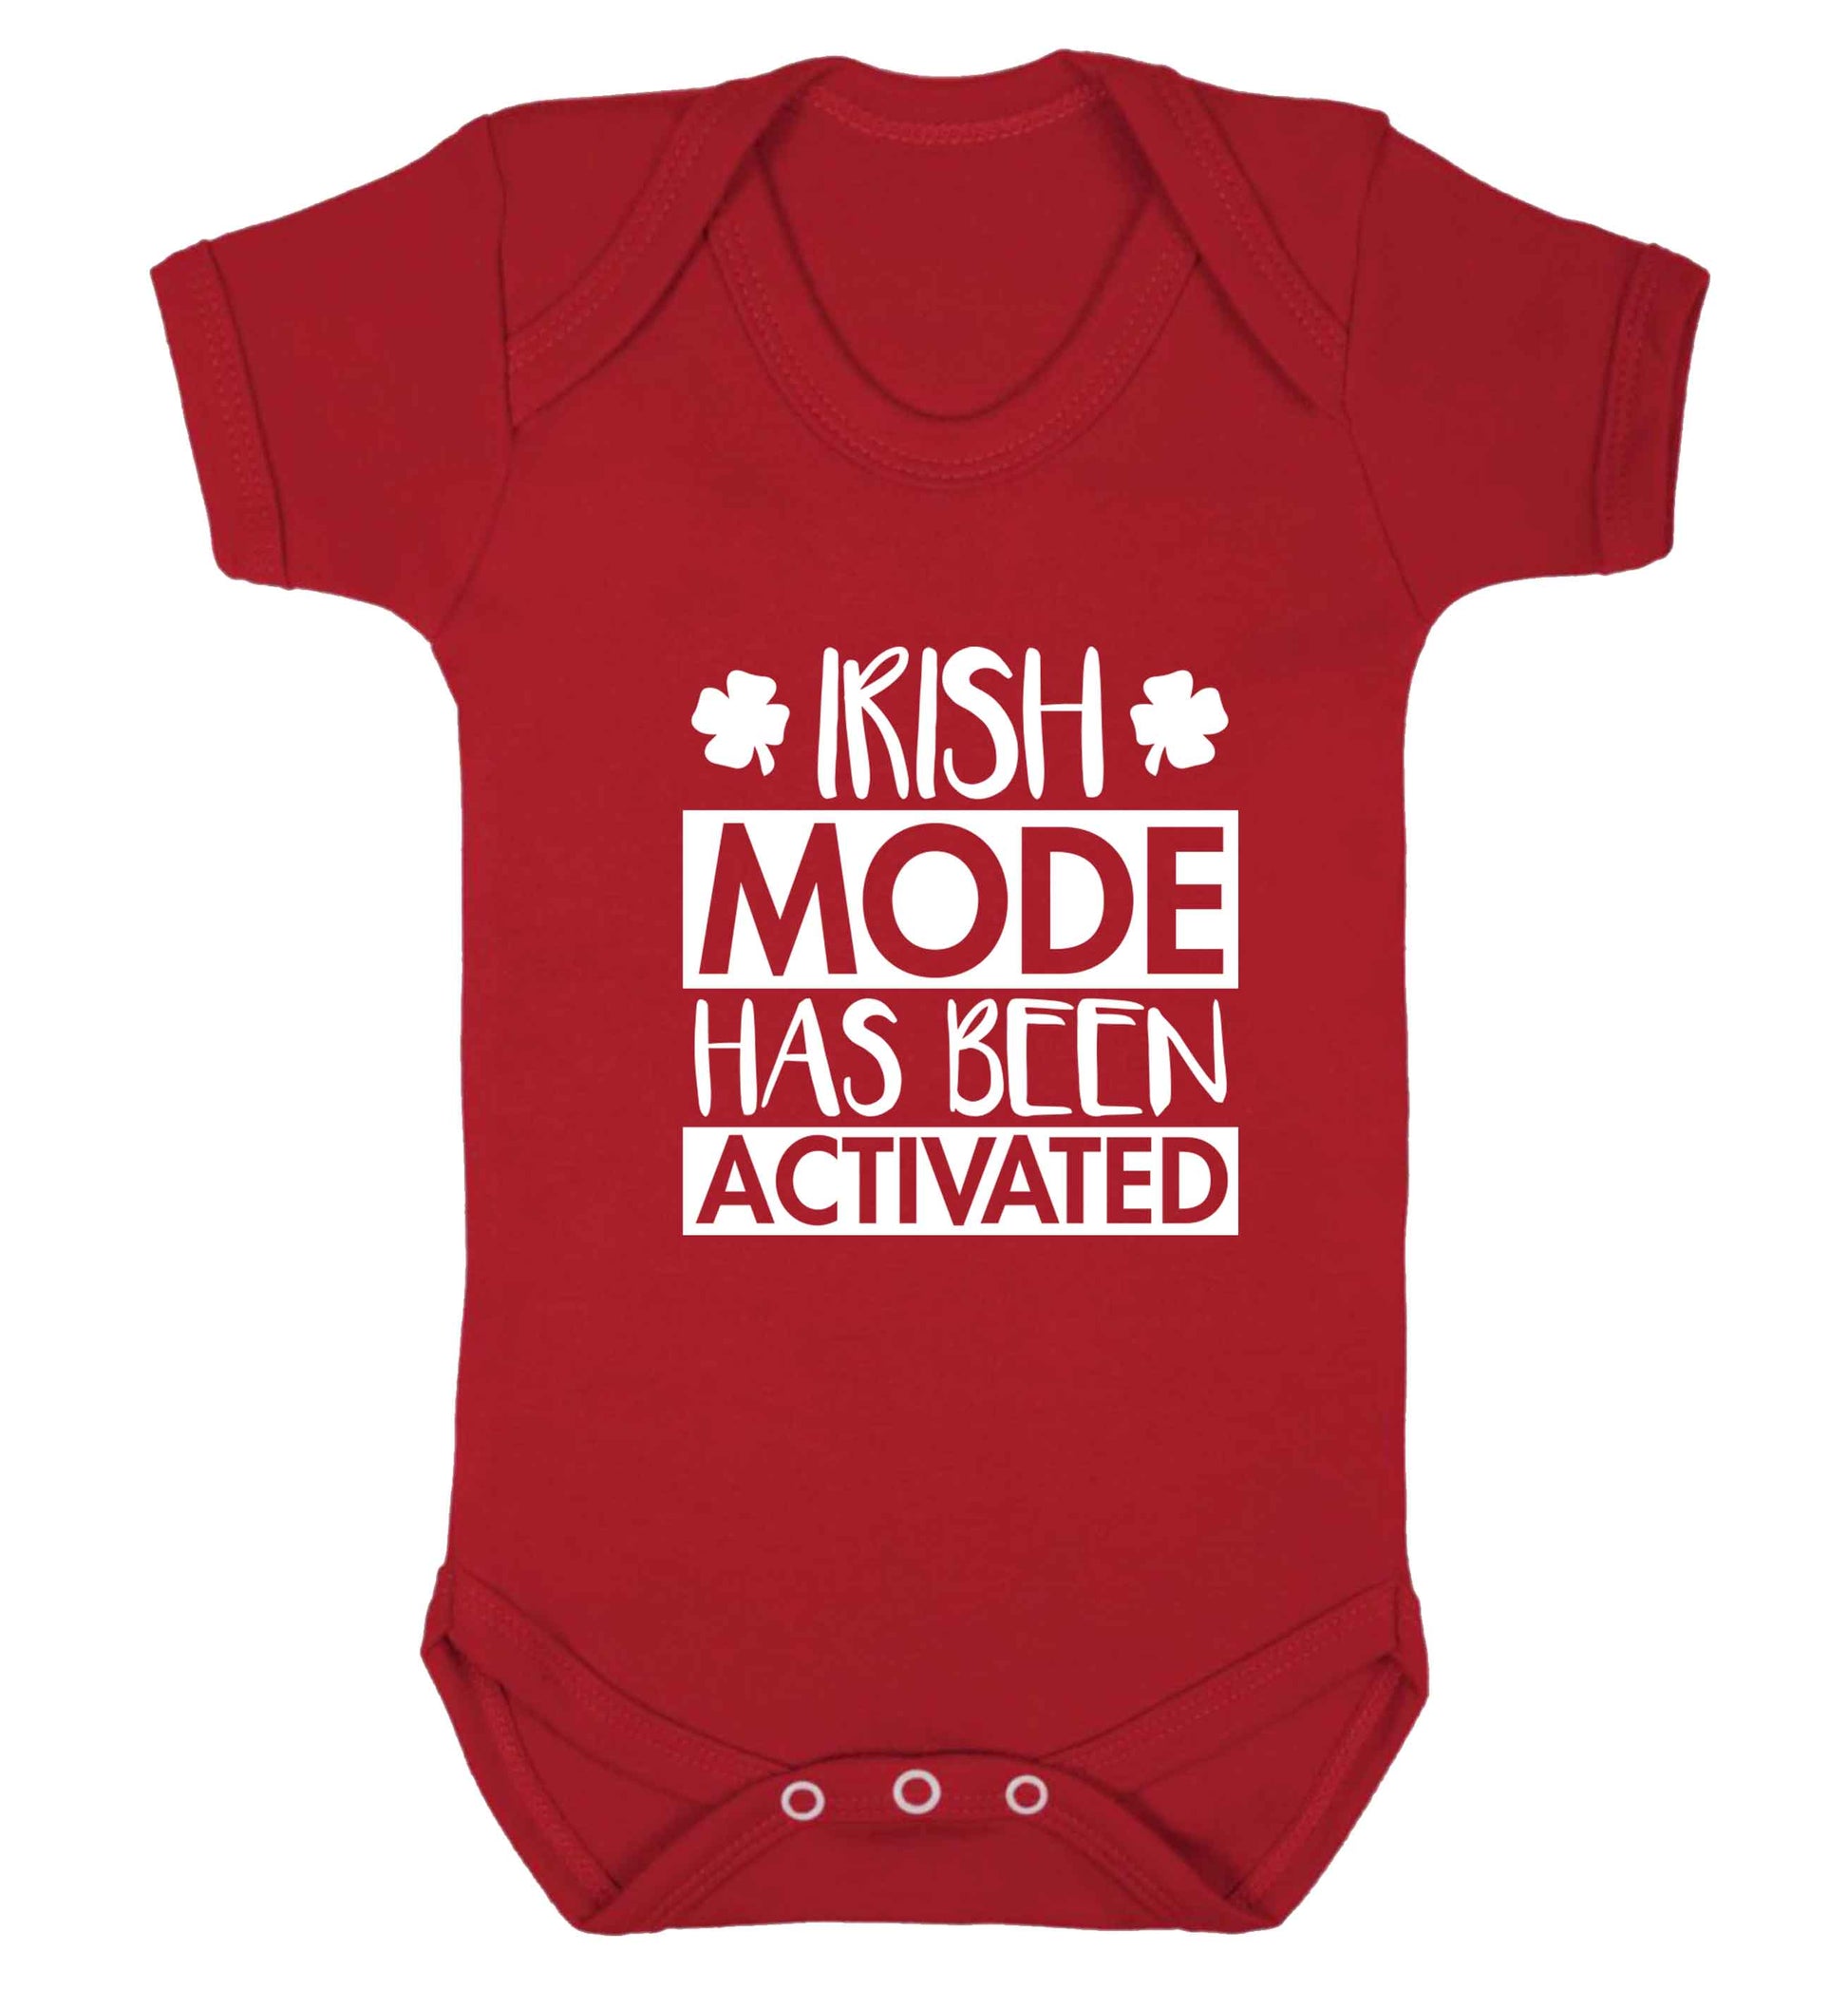 Irish mode has been activated baby vest red 18-24 months